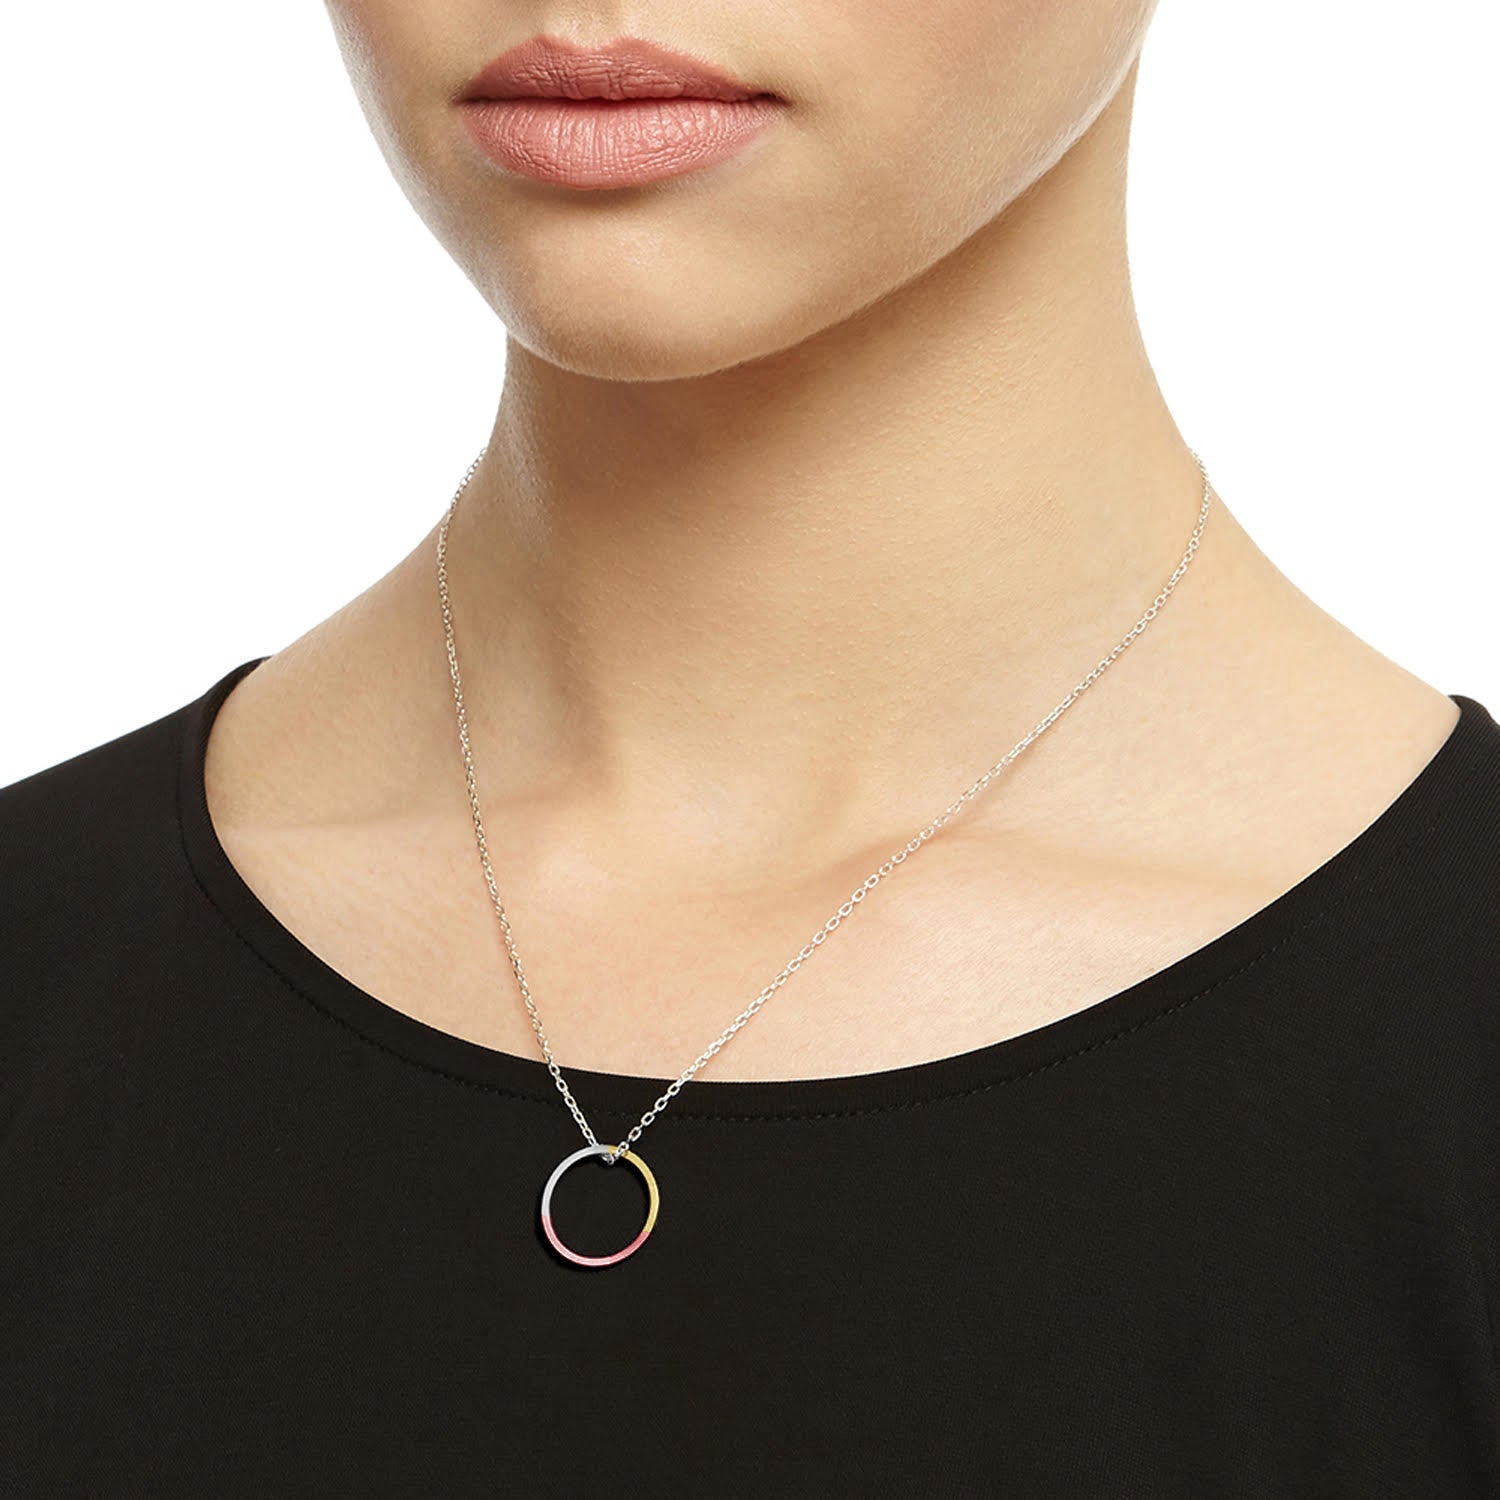 Three-Tone Circle Necklace - 9k Yellow & Rose Gold & Silver